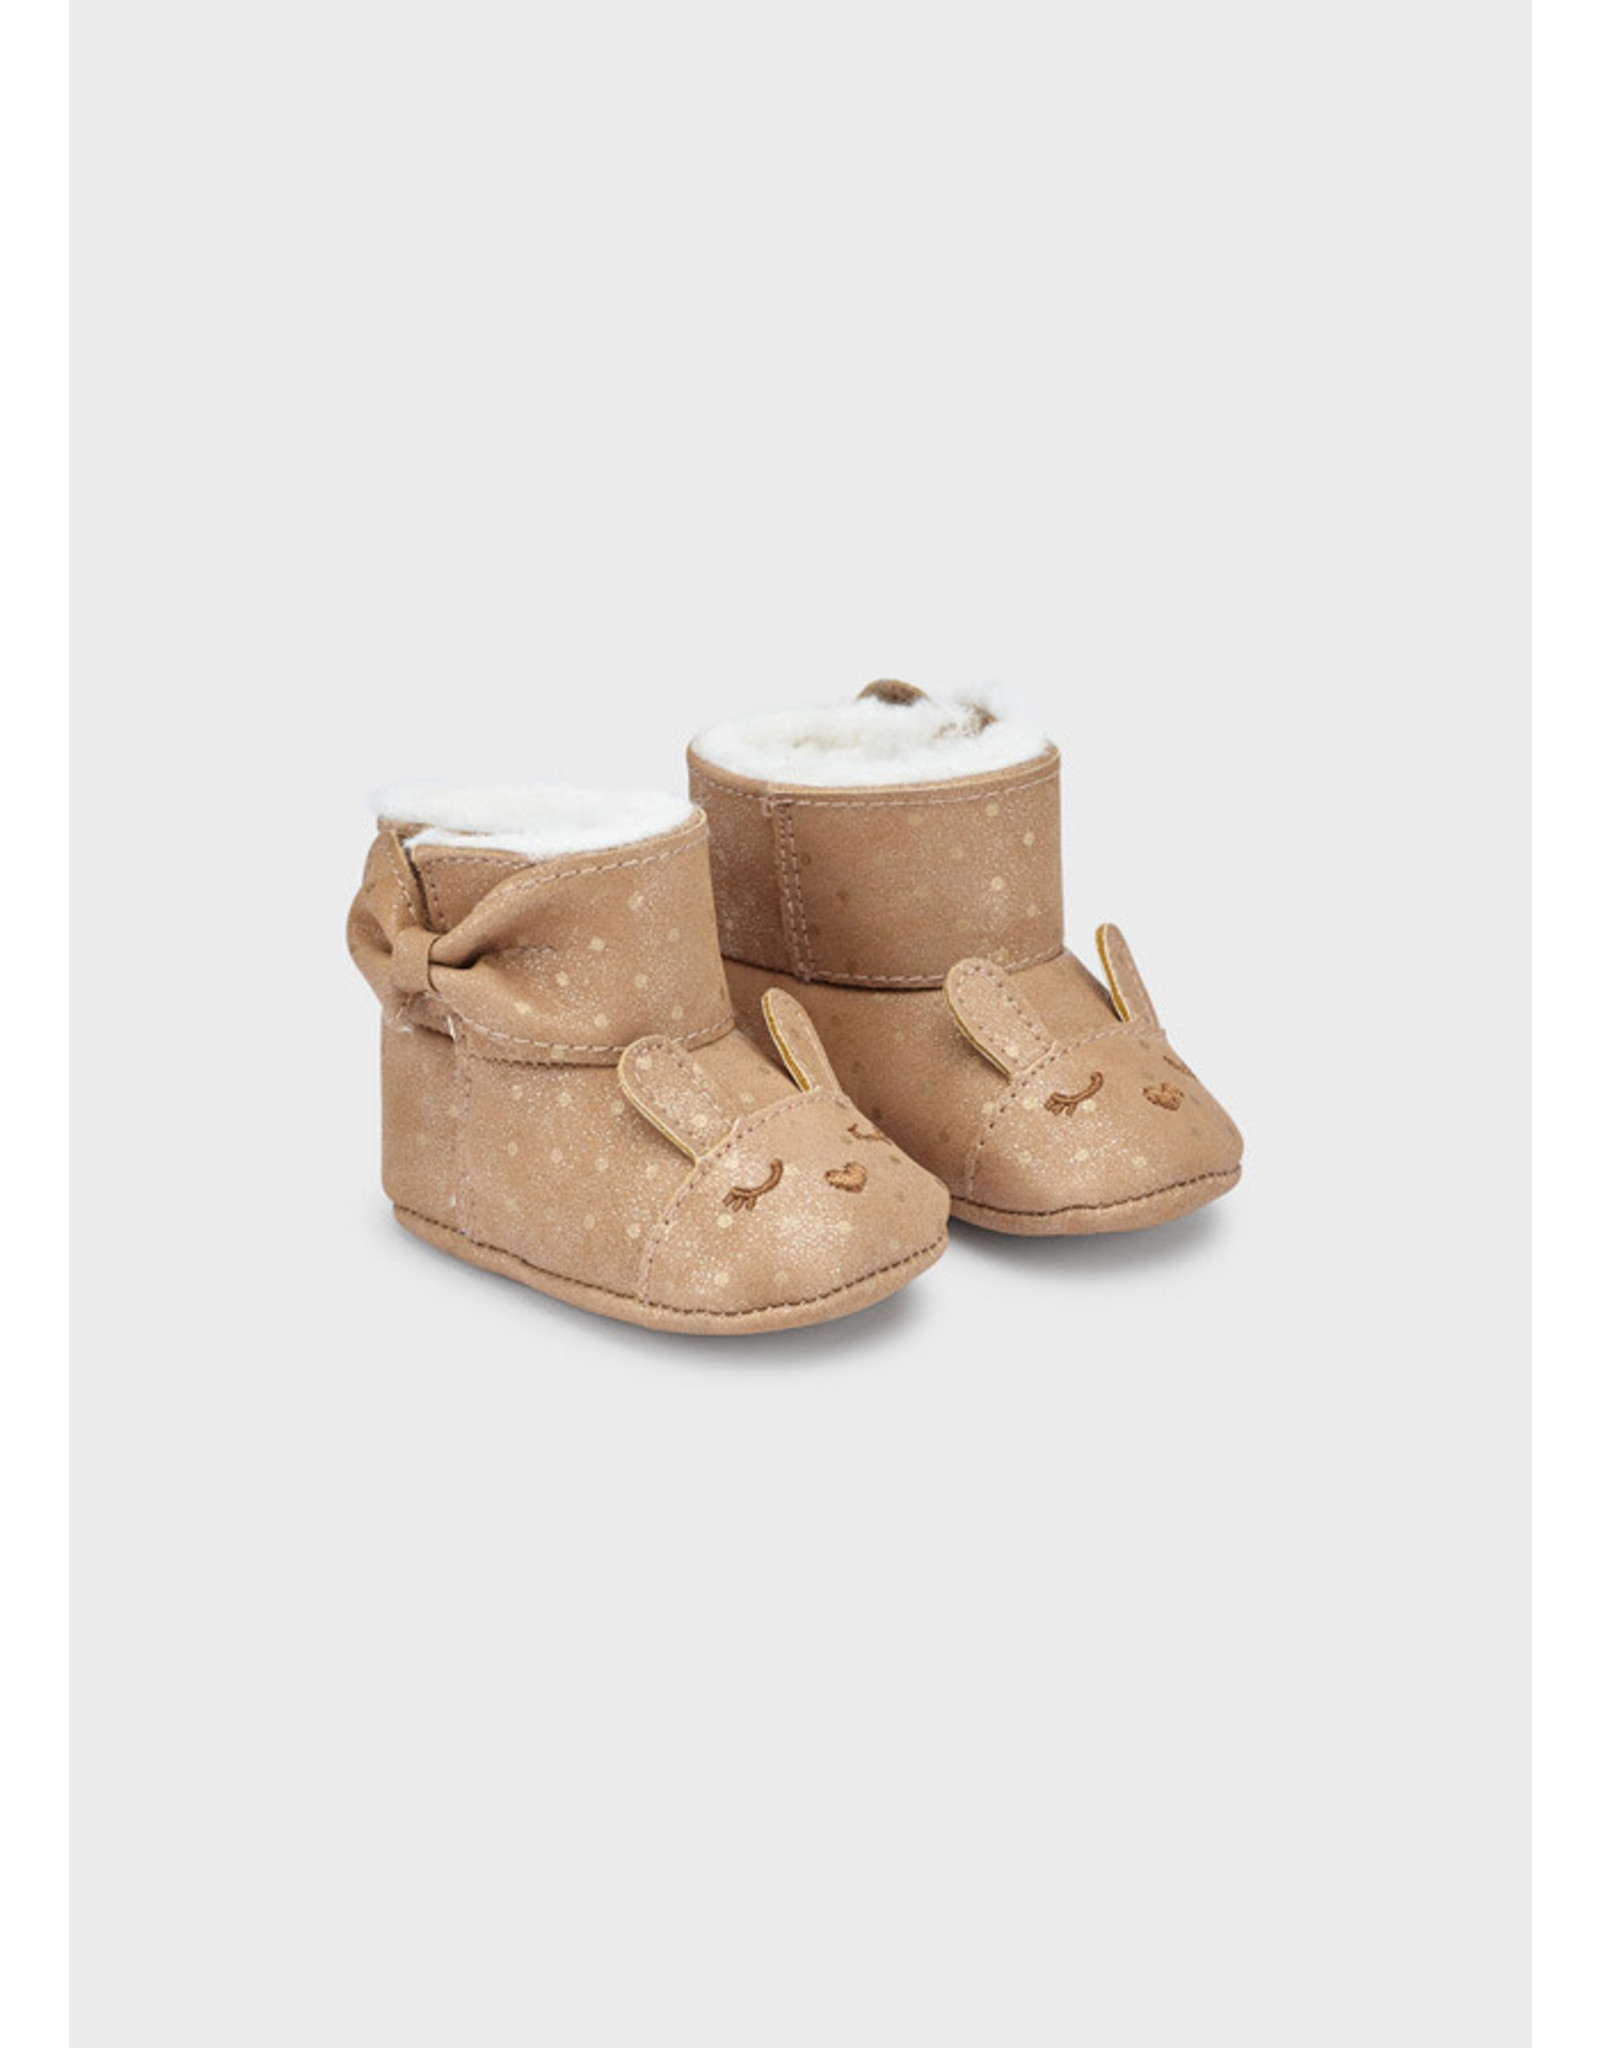 Mayoral Beige Faux Fur Baby Boots